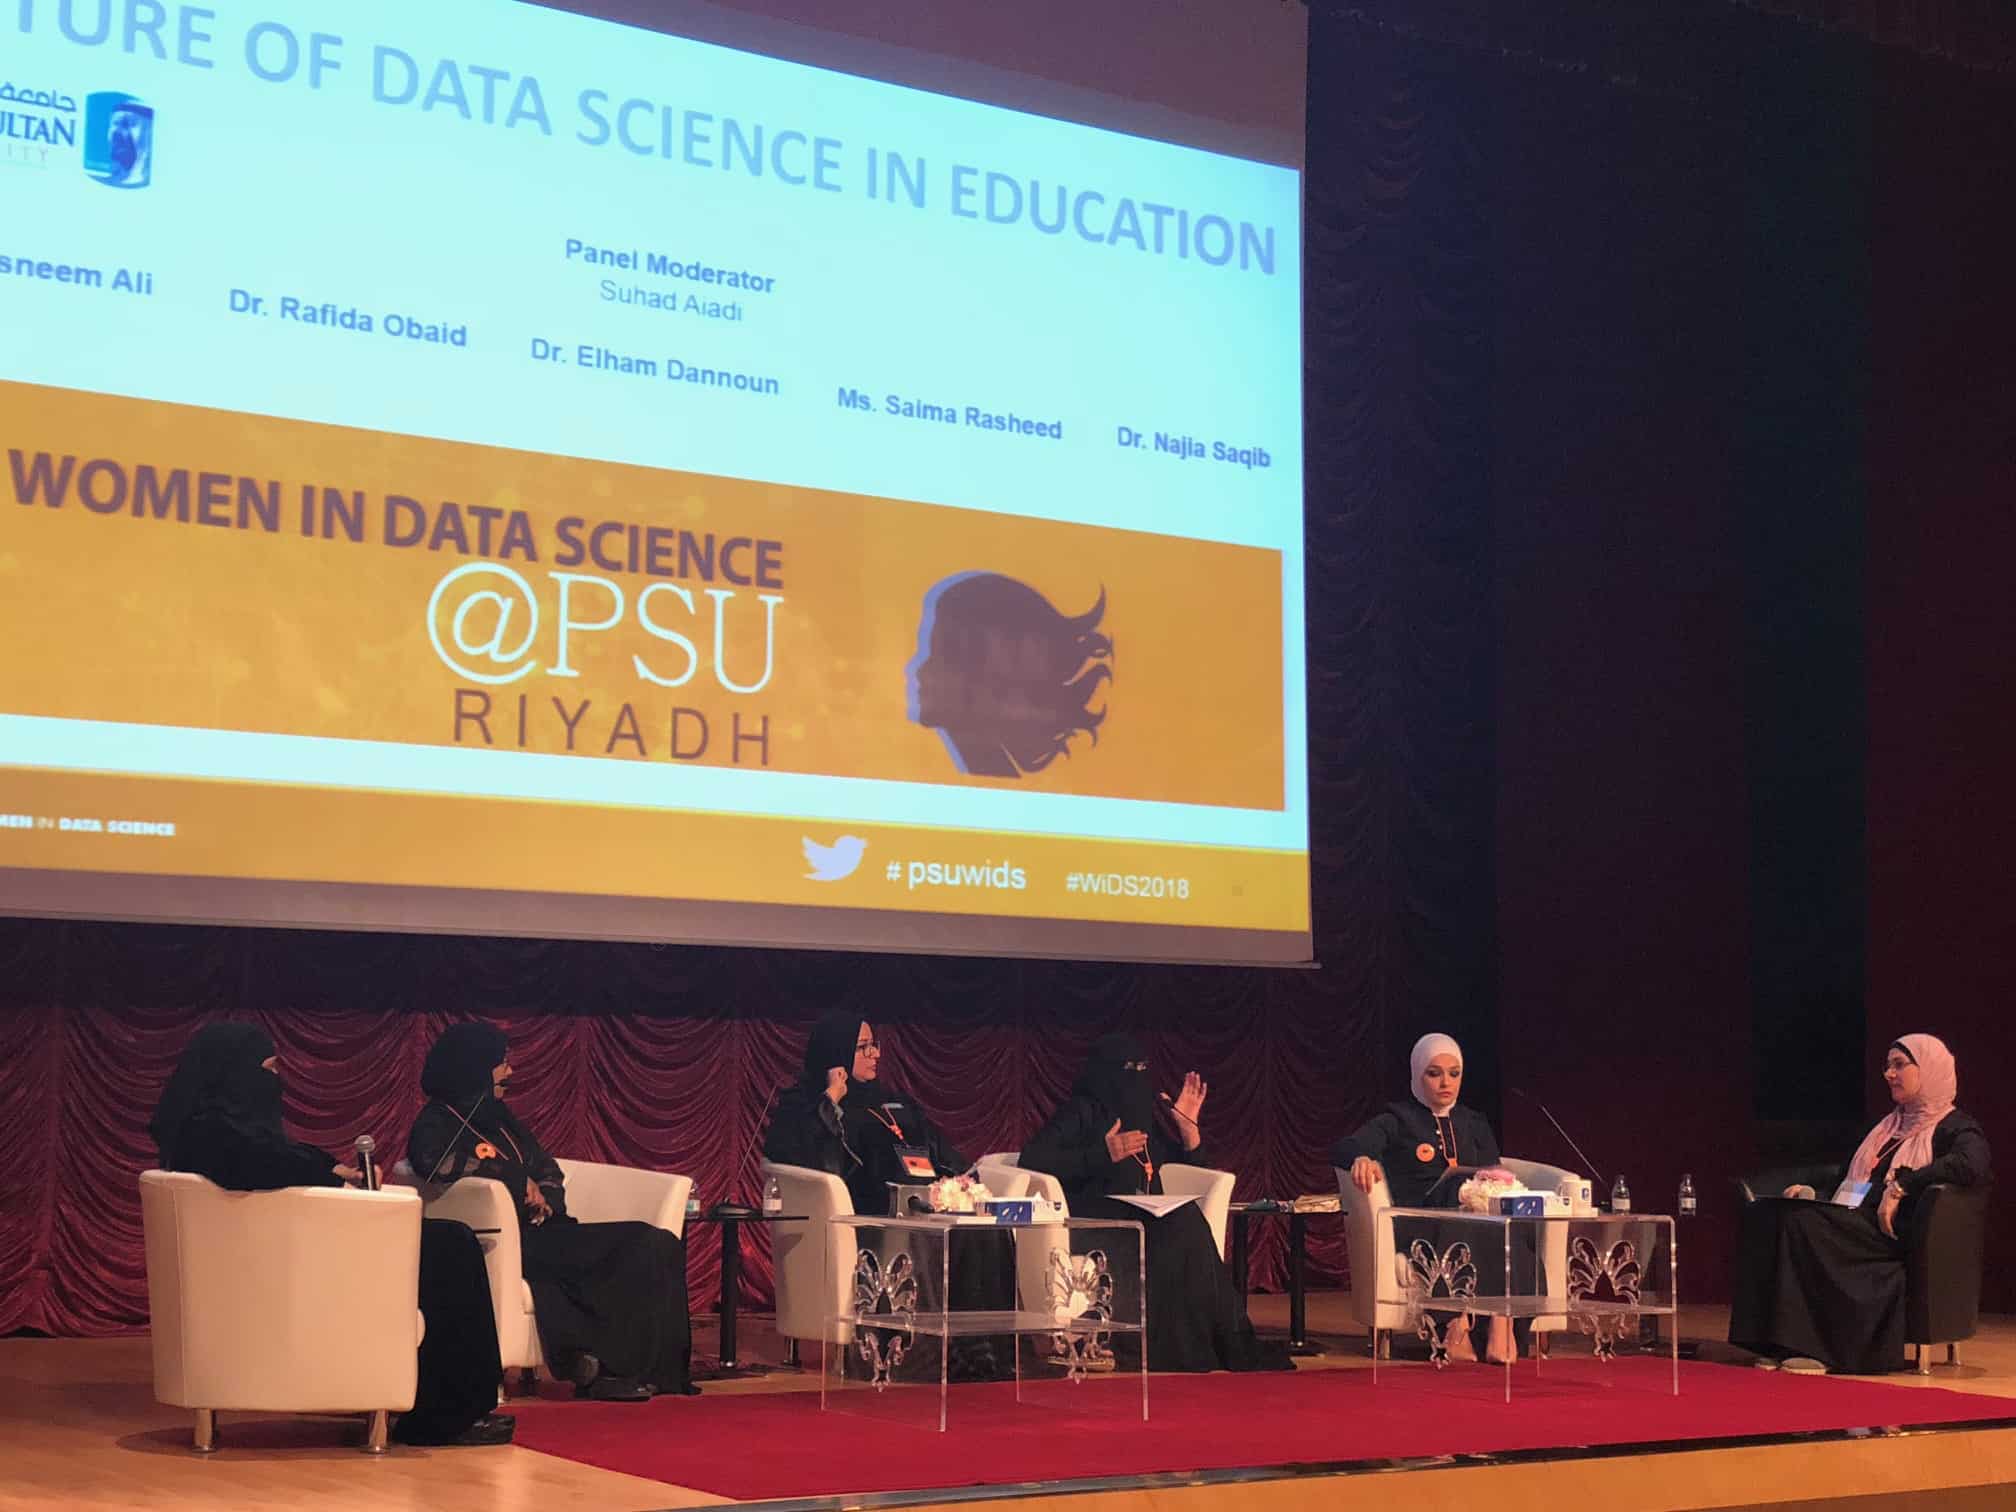 Women in Data Science Forum at Prince Sultan University in Collaboration with Stanford University